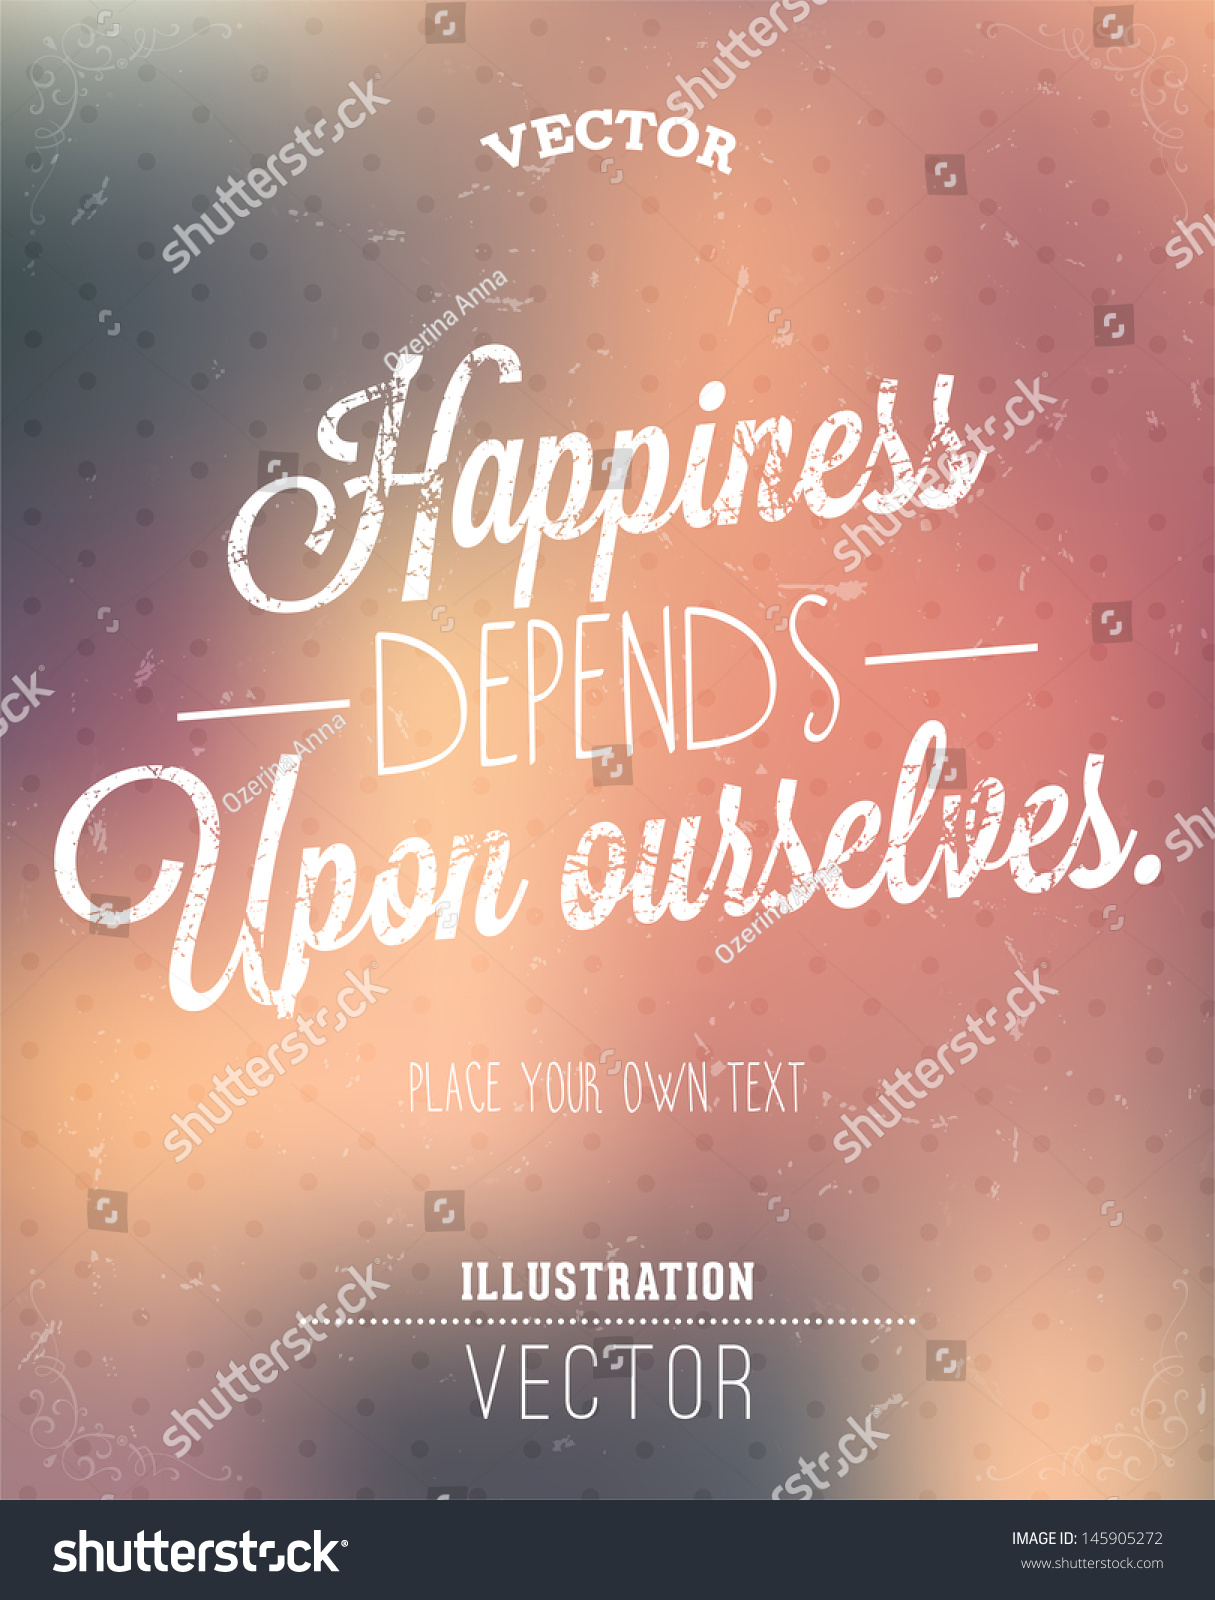 Happiness depends ourselves essay